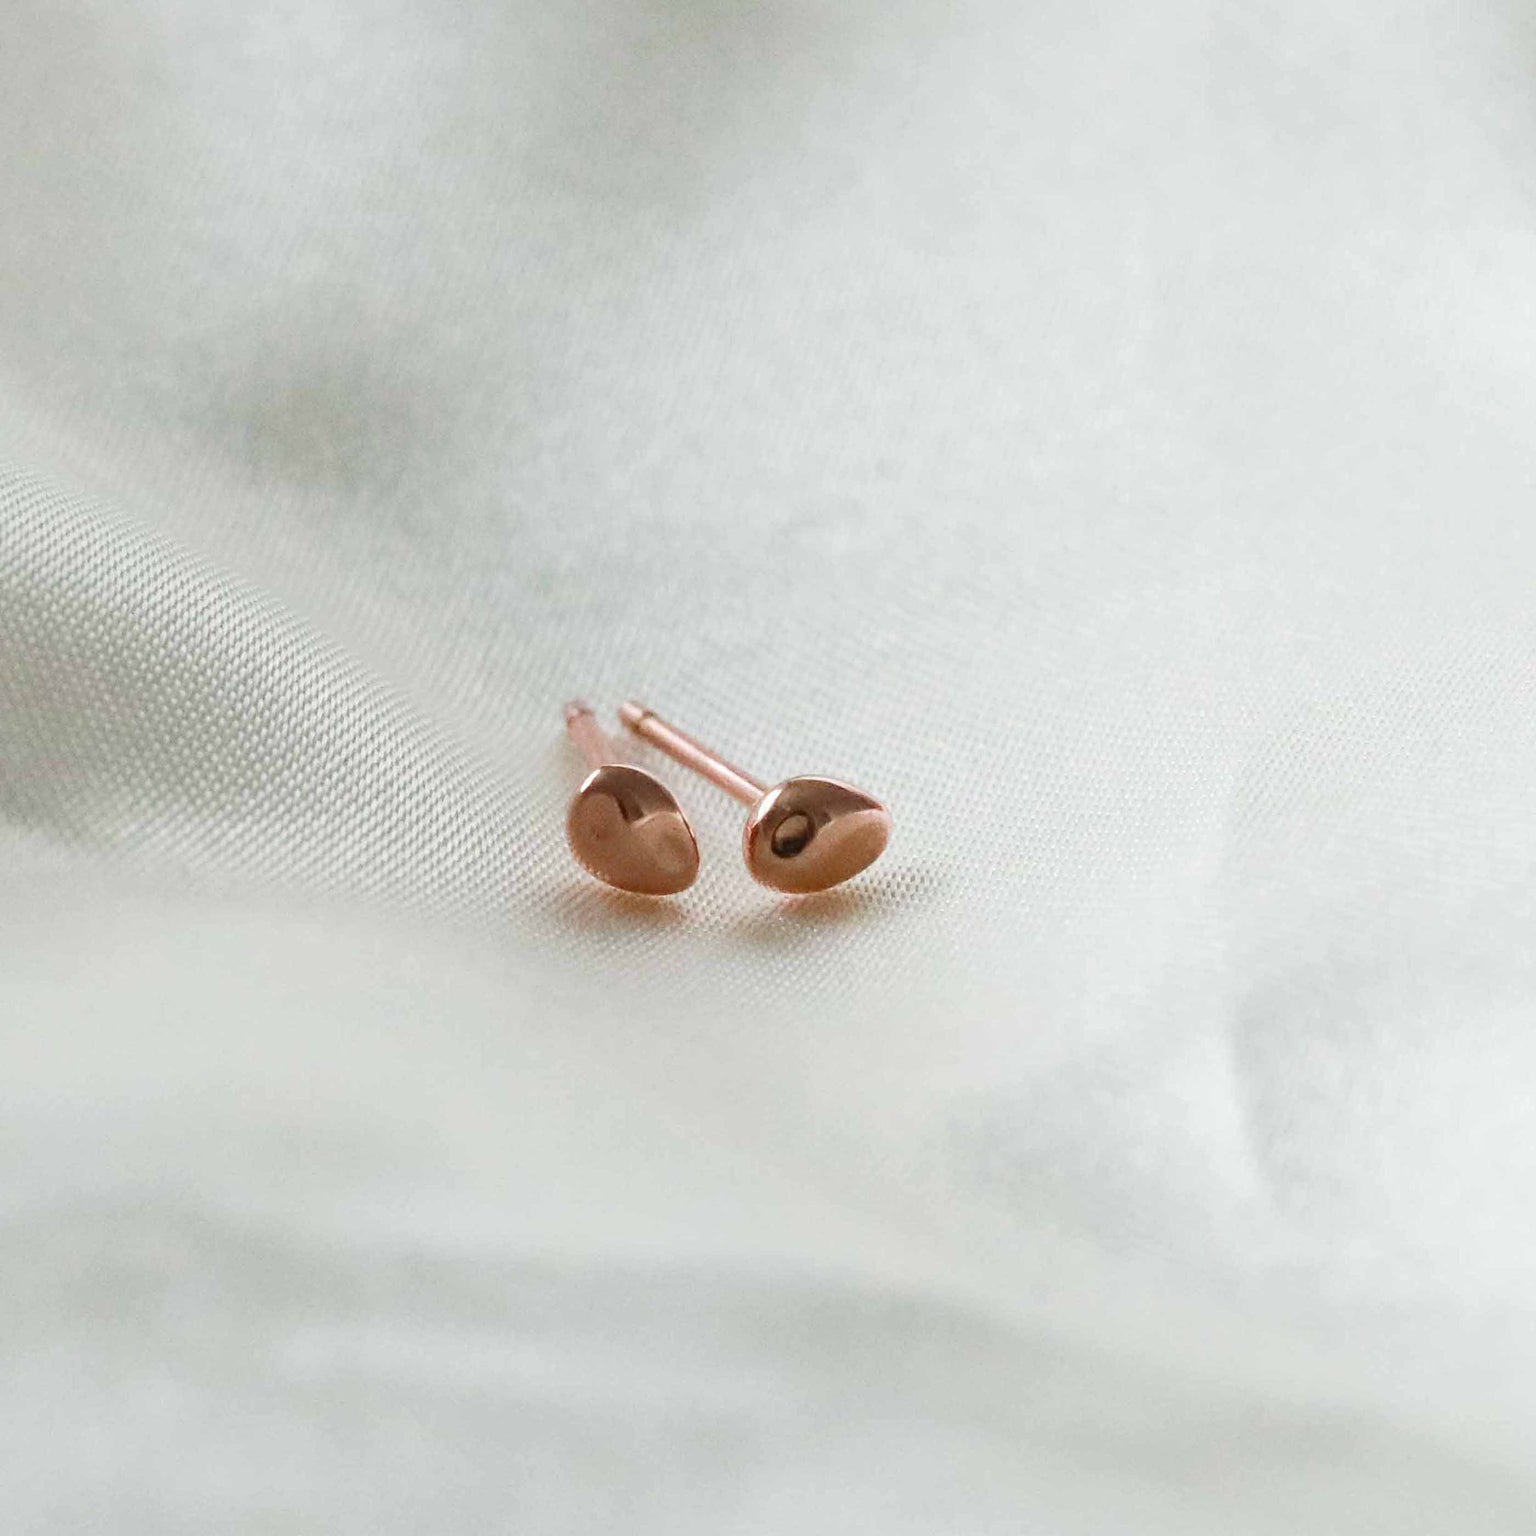 Molten Small Stud Earrings in Rose Gold